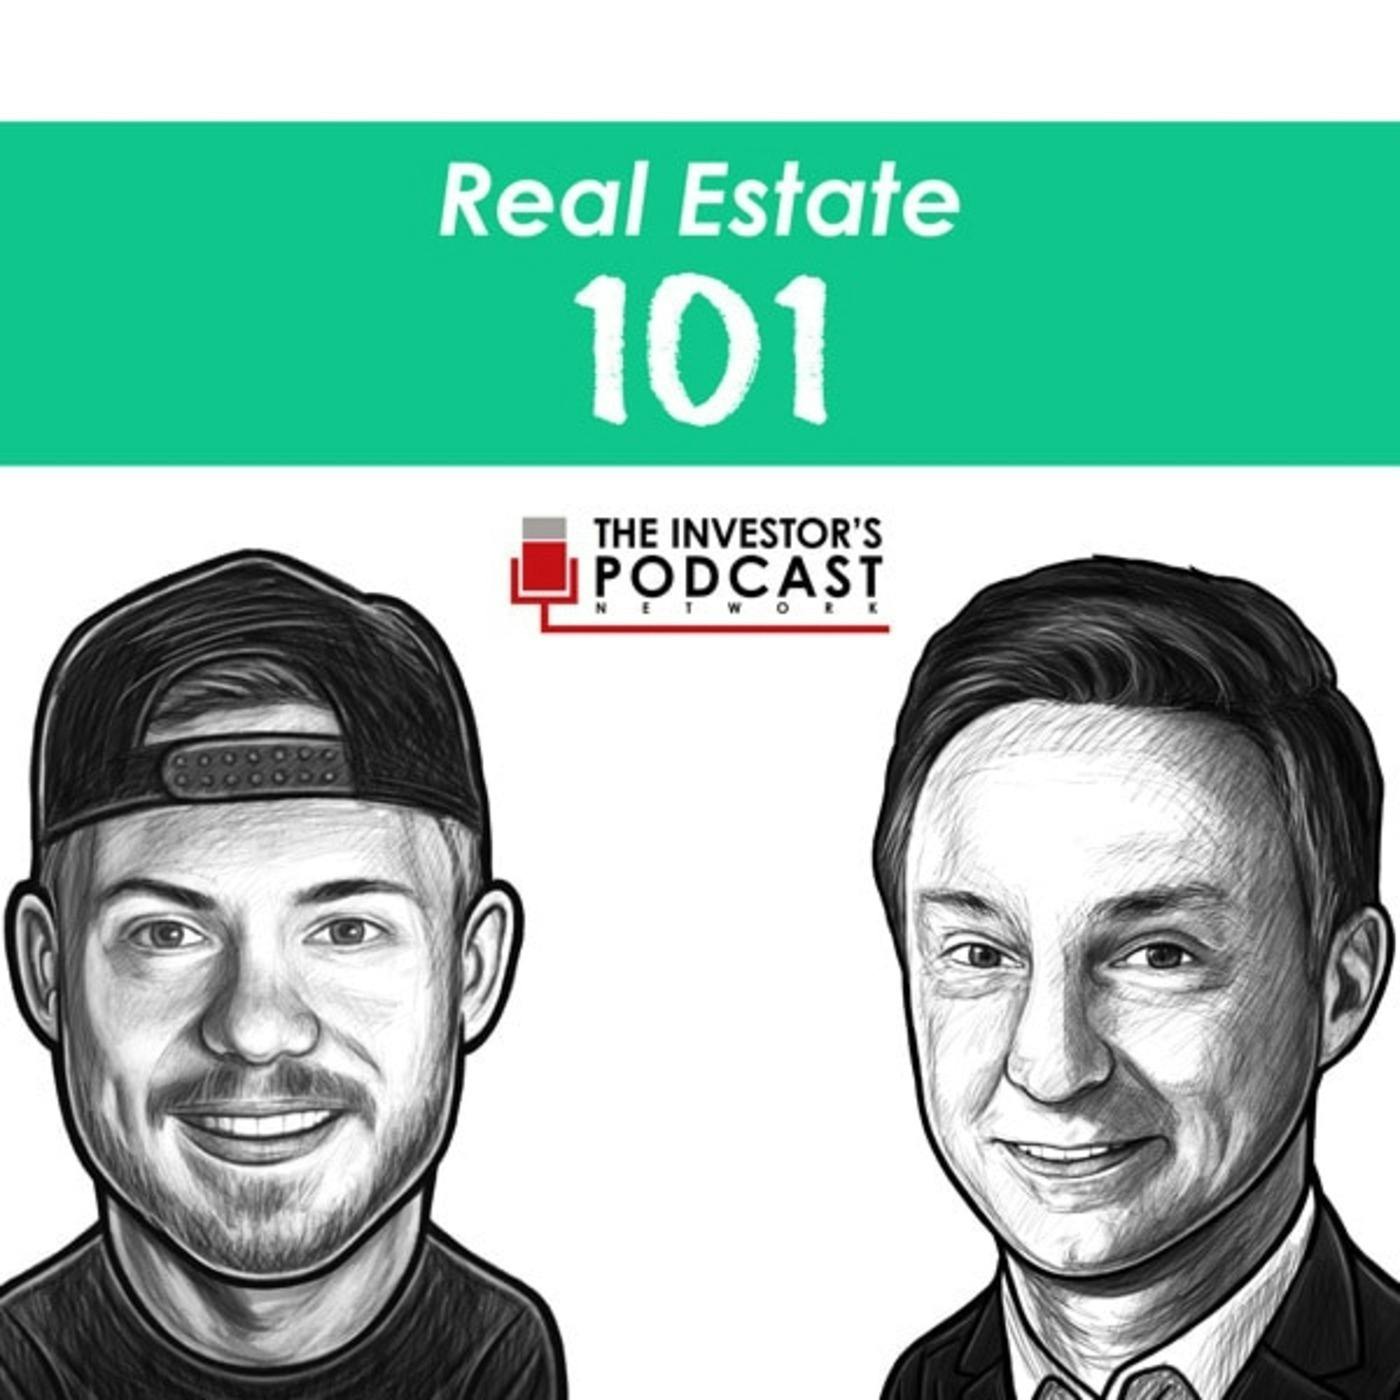 REI181: 400 Flips, Midwest Multi-Family, and Mental Health Advocacy w/ Jonathan Barr